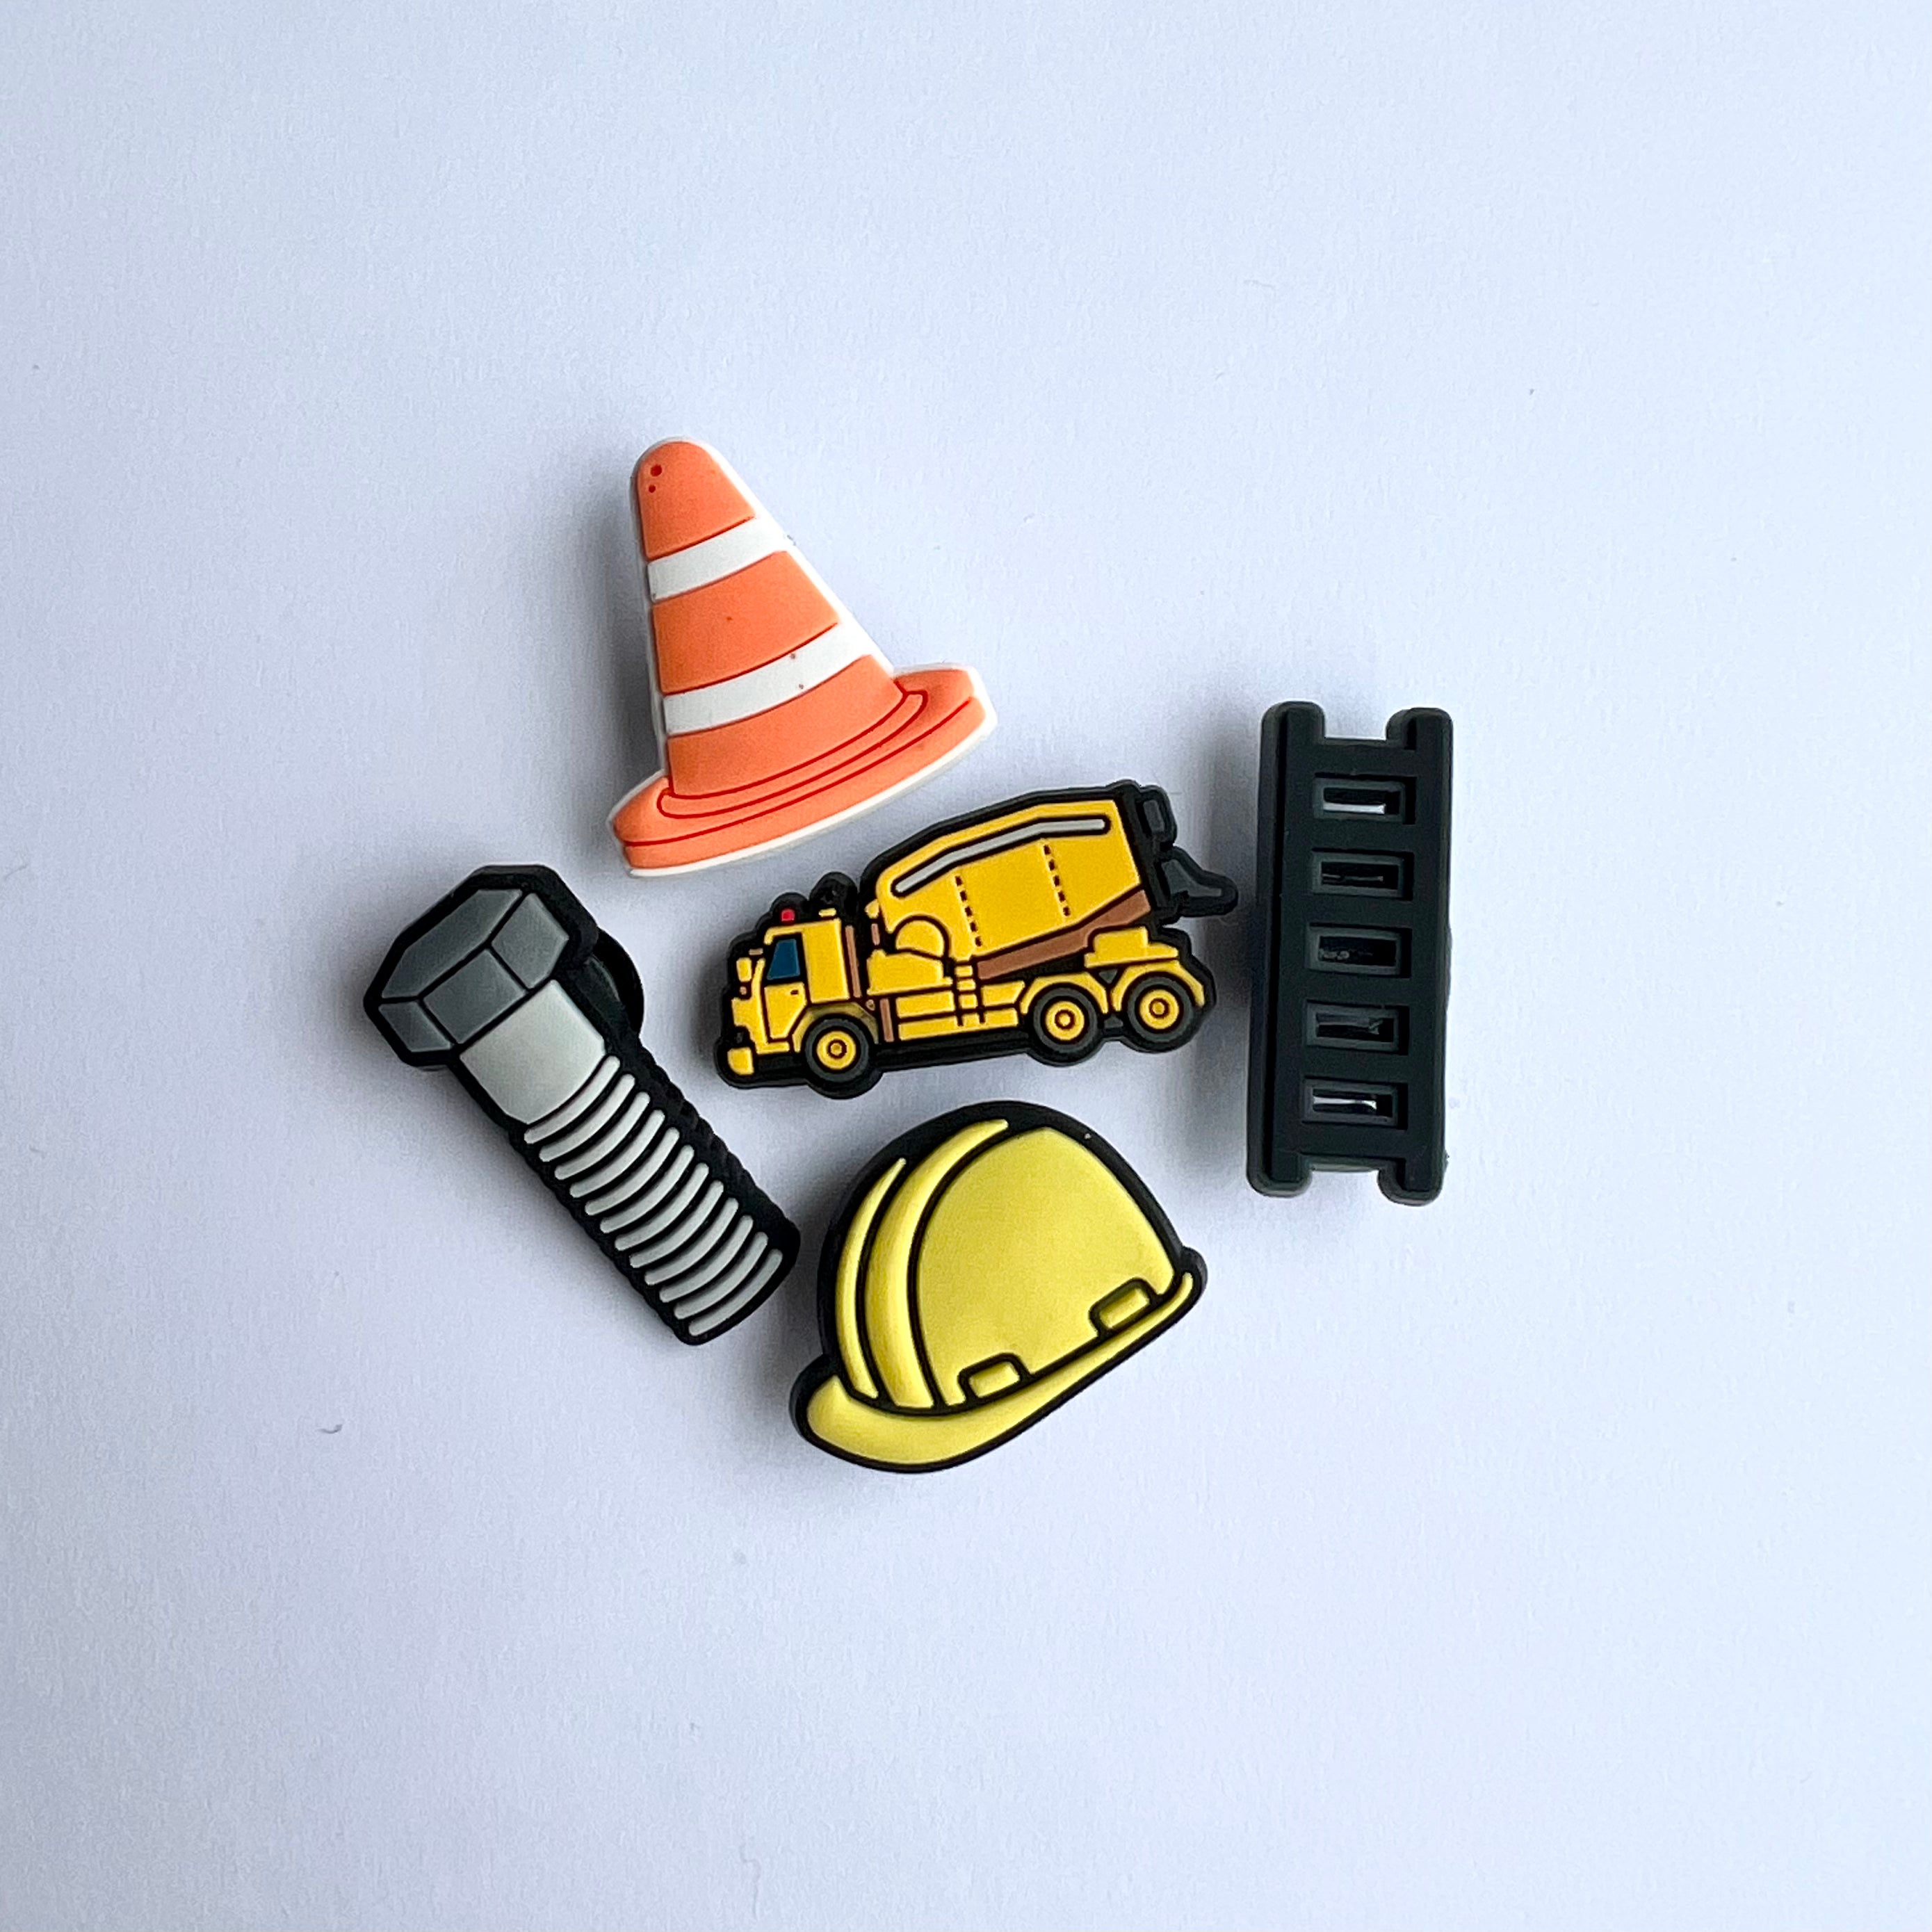 The Construction Charms Pack